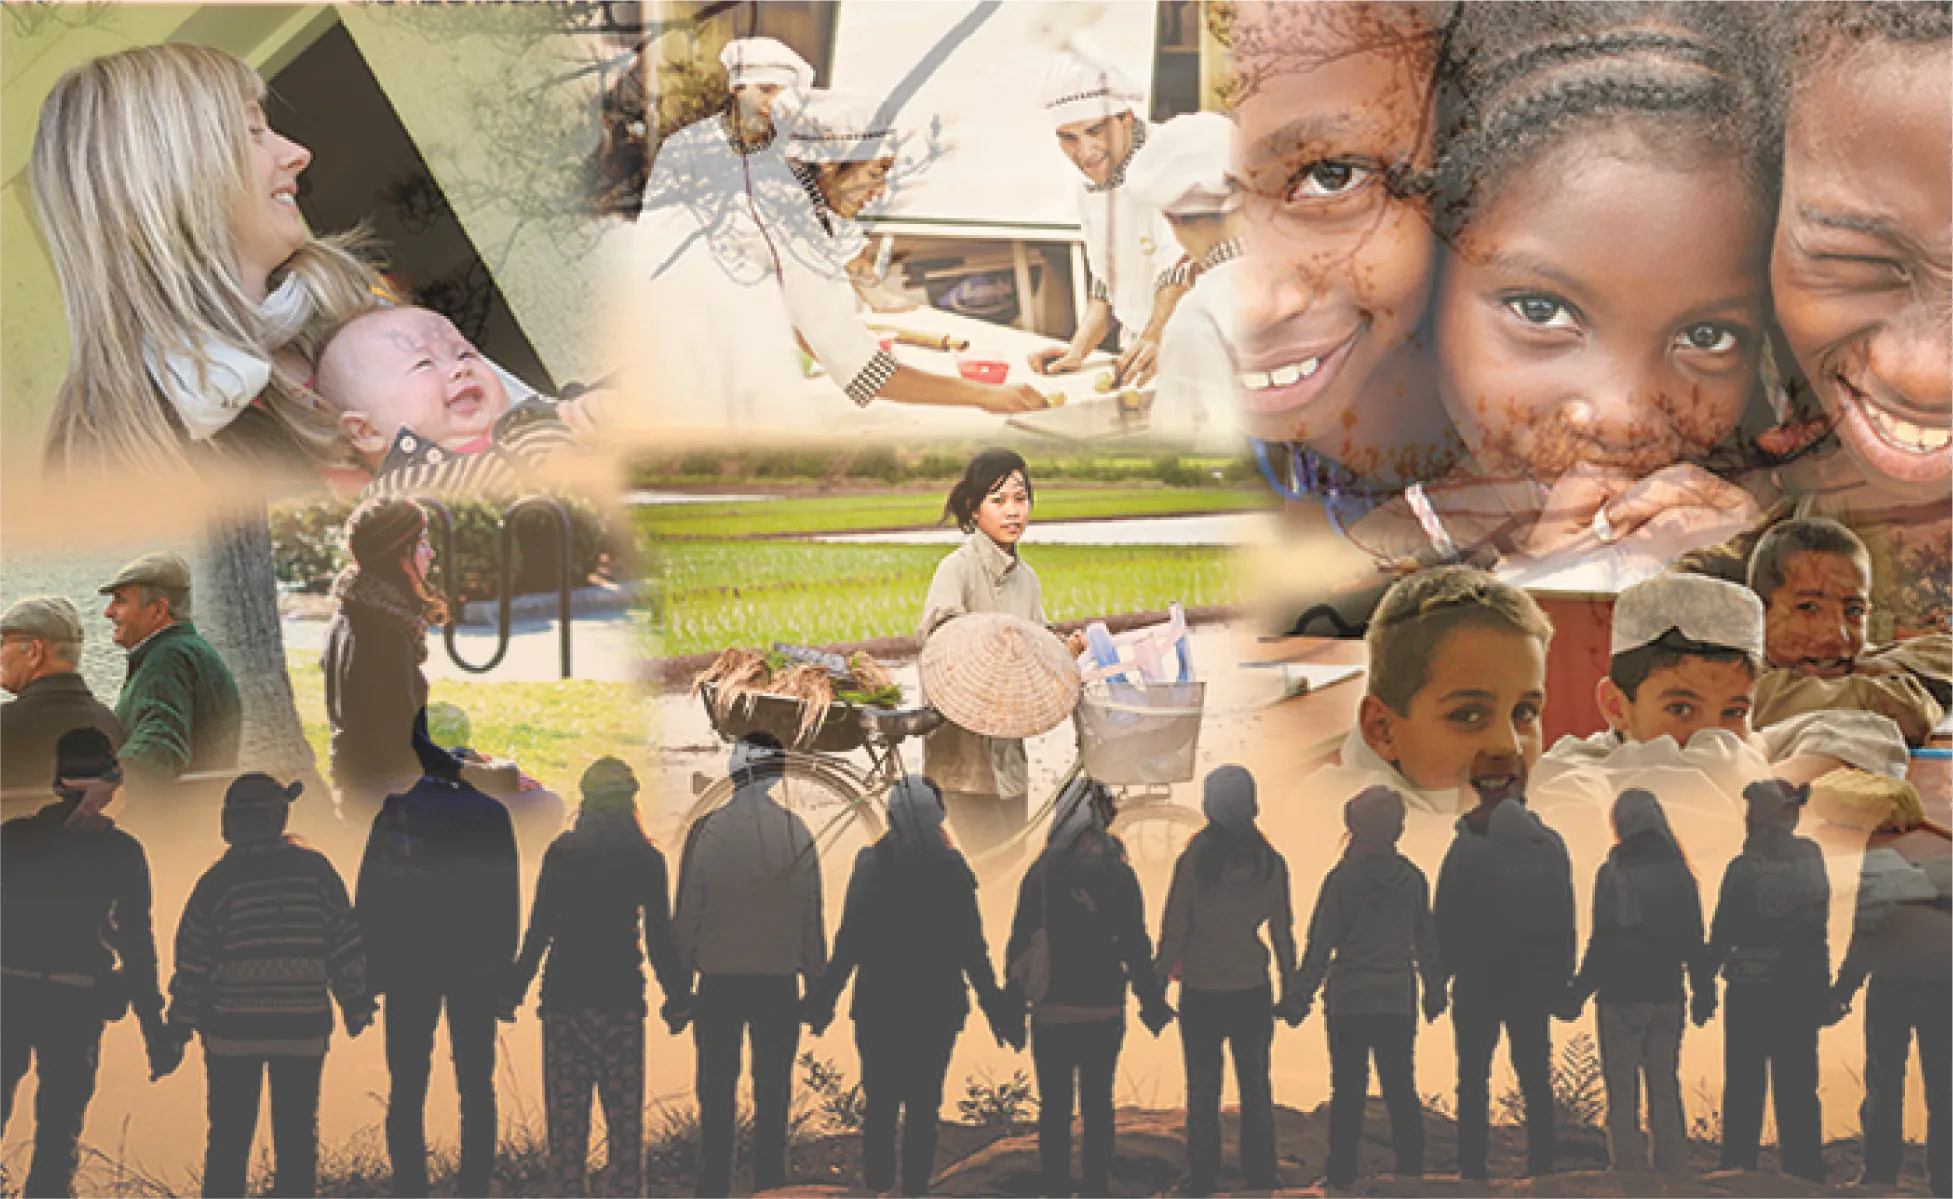 A collage shows several photographs of diverse peoples.